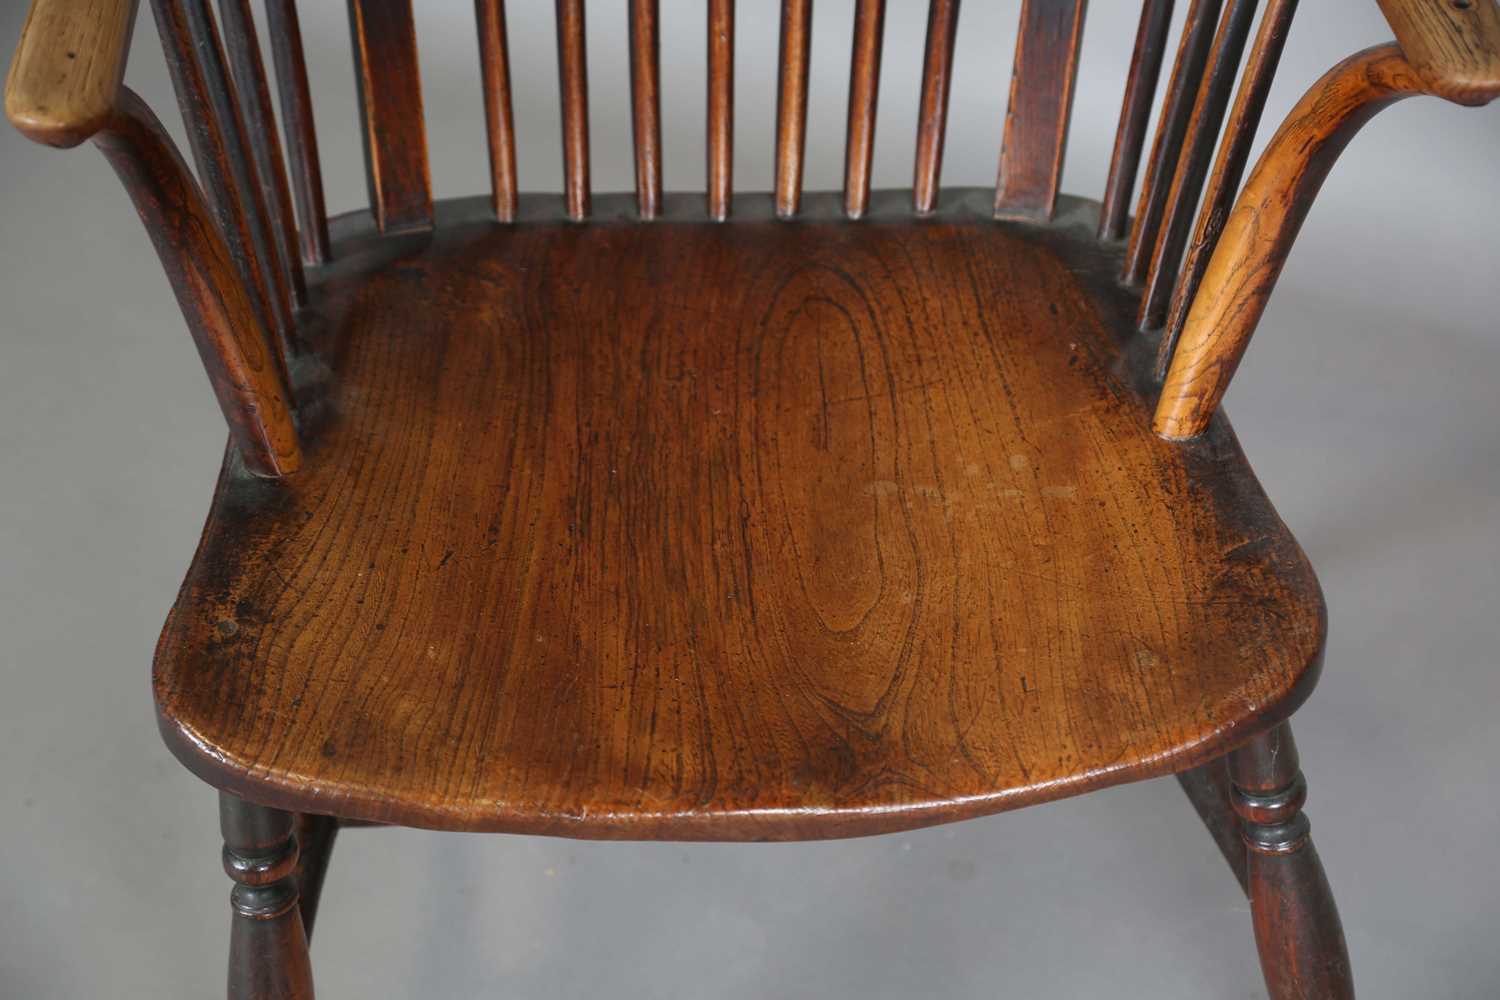 A mid-19th century provincial ash and elm bar and stick back Windsor armchair with a wide elm seat - Image 4 of 9